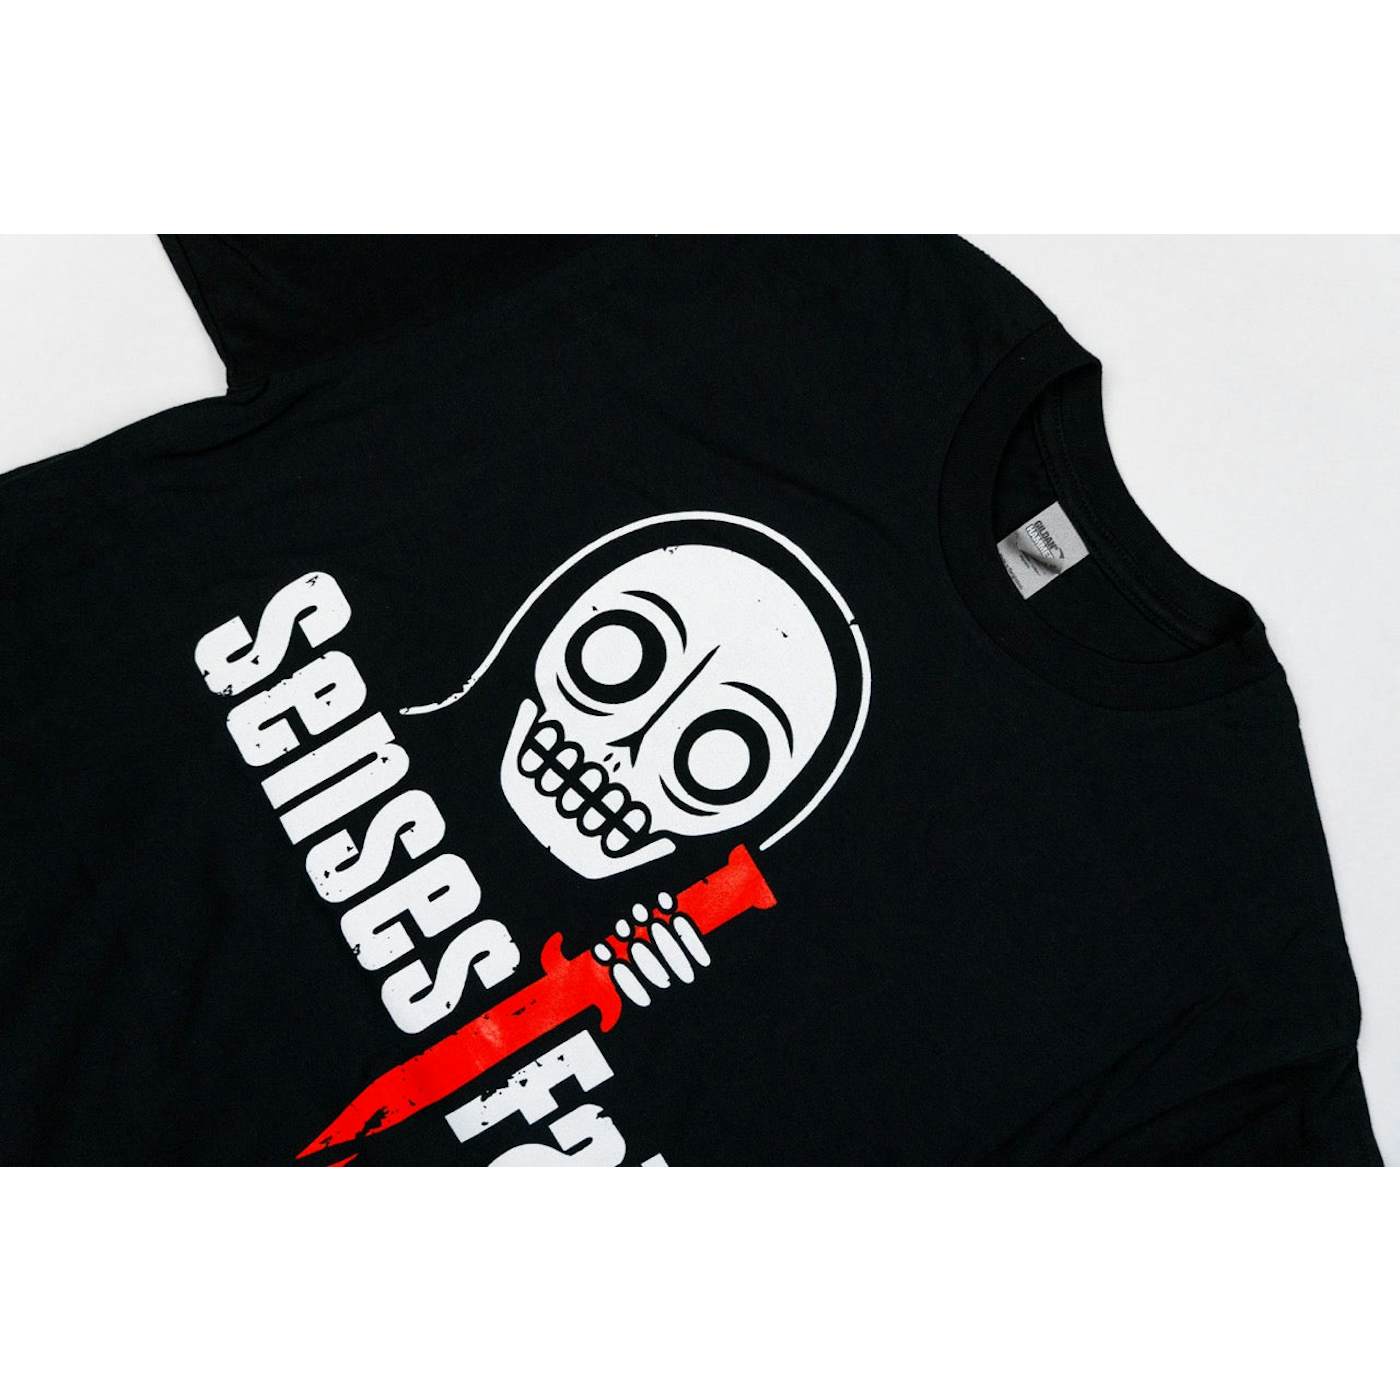 Senses Fail - Skeleton Hand Youth T-Shirt – Official Store Wholesale